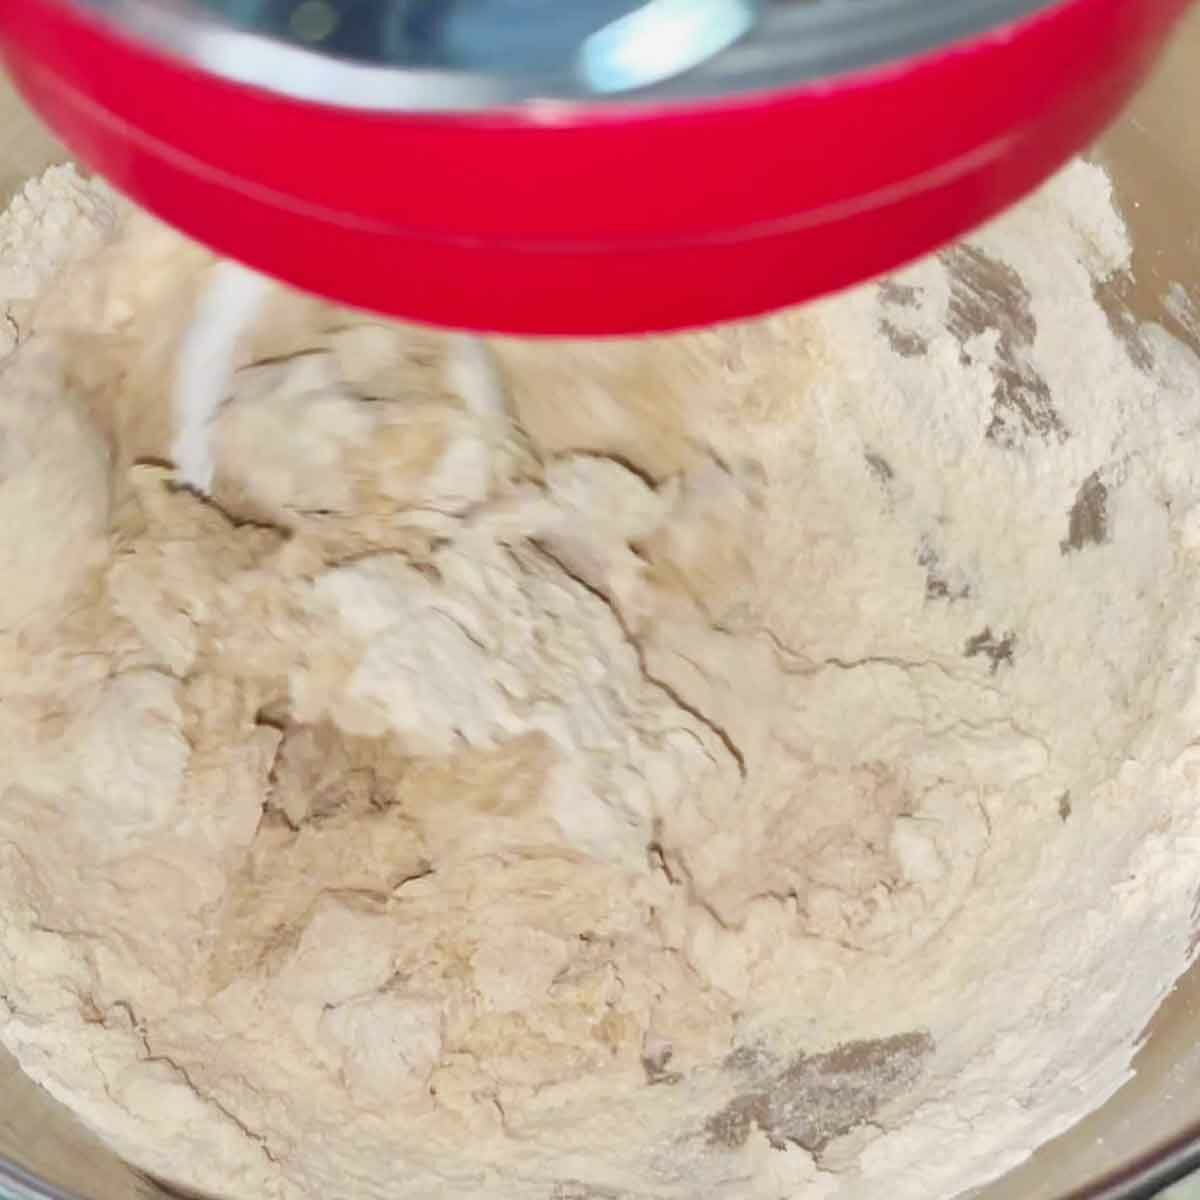 Kneading started in stand mixer.